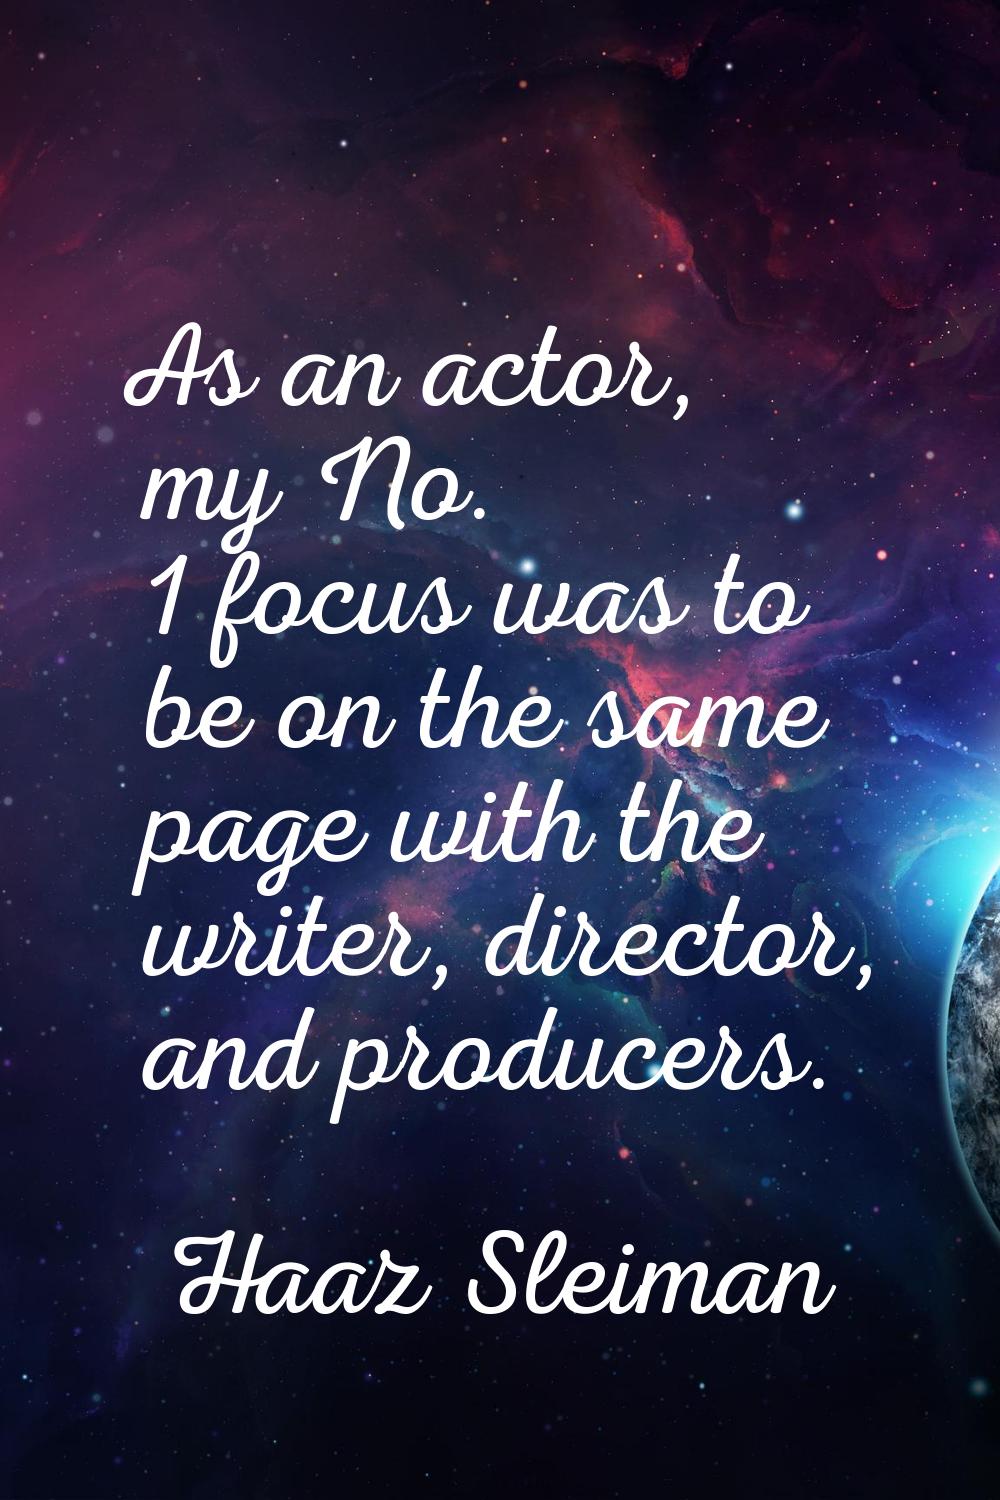 As an actor, my No. 1 focus was to be on the same page with the writer, director, and producers.